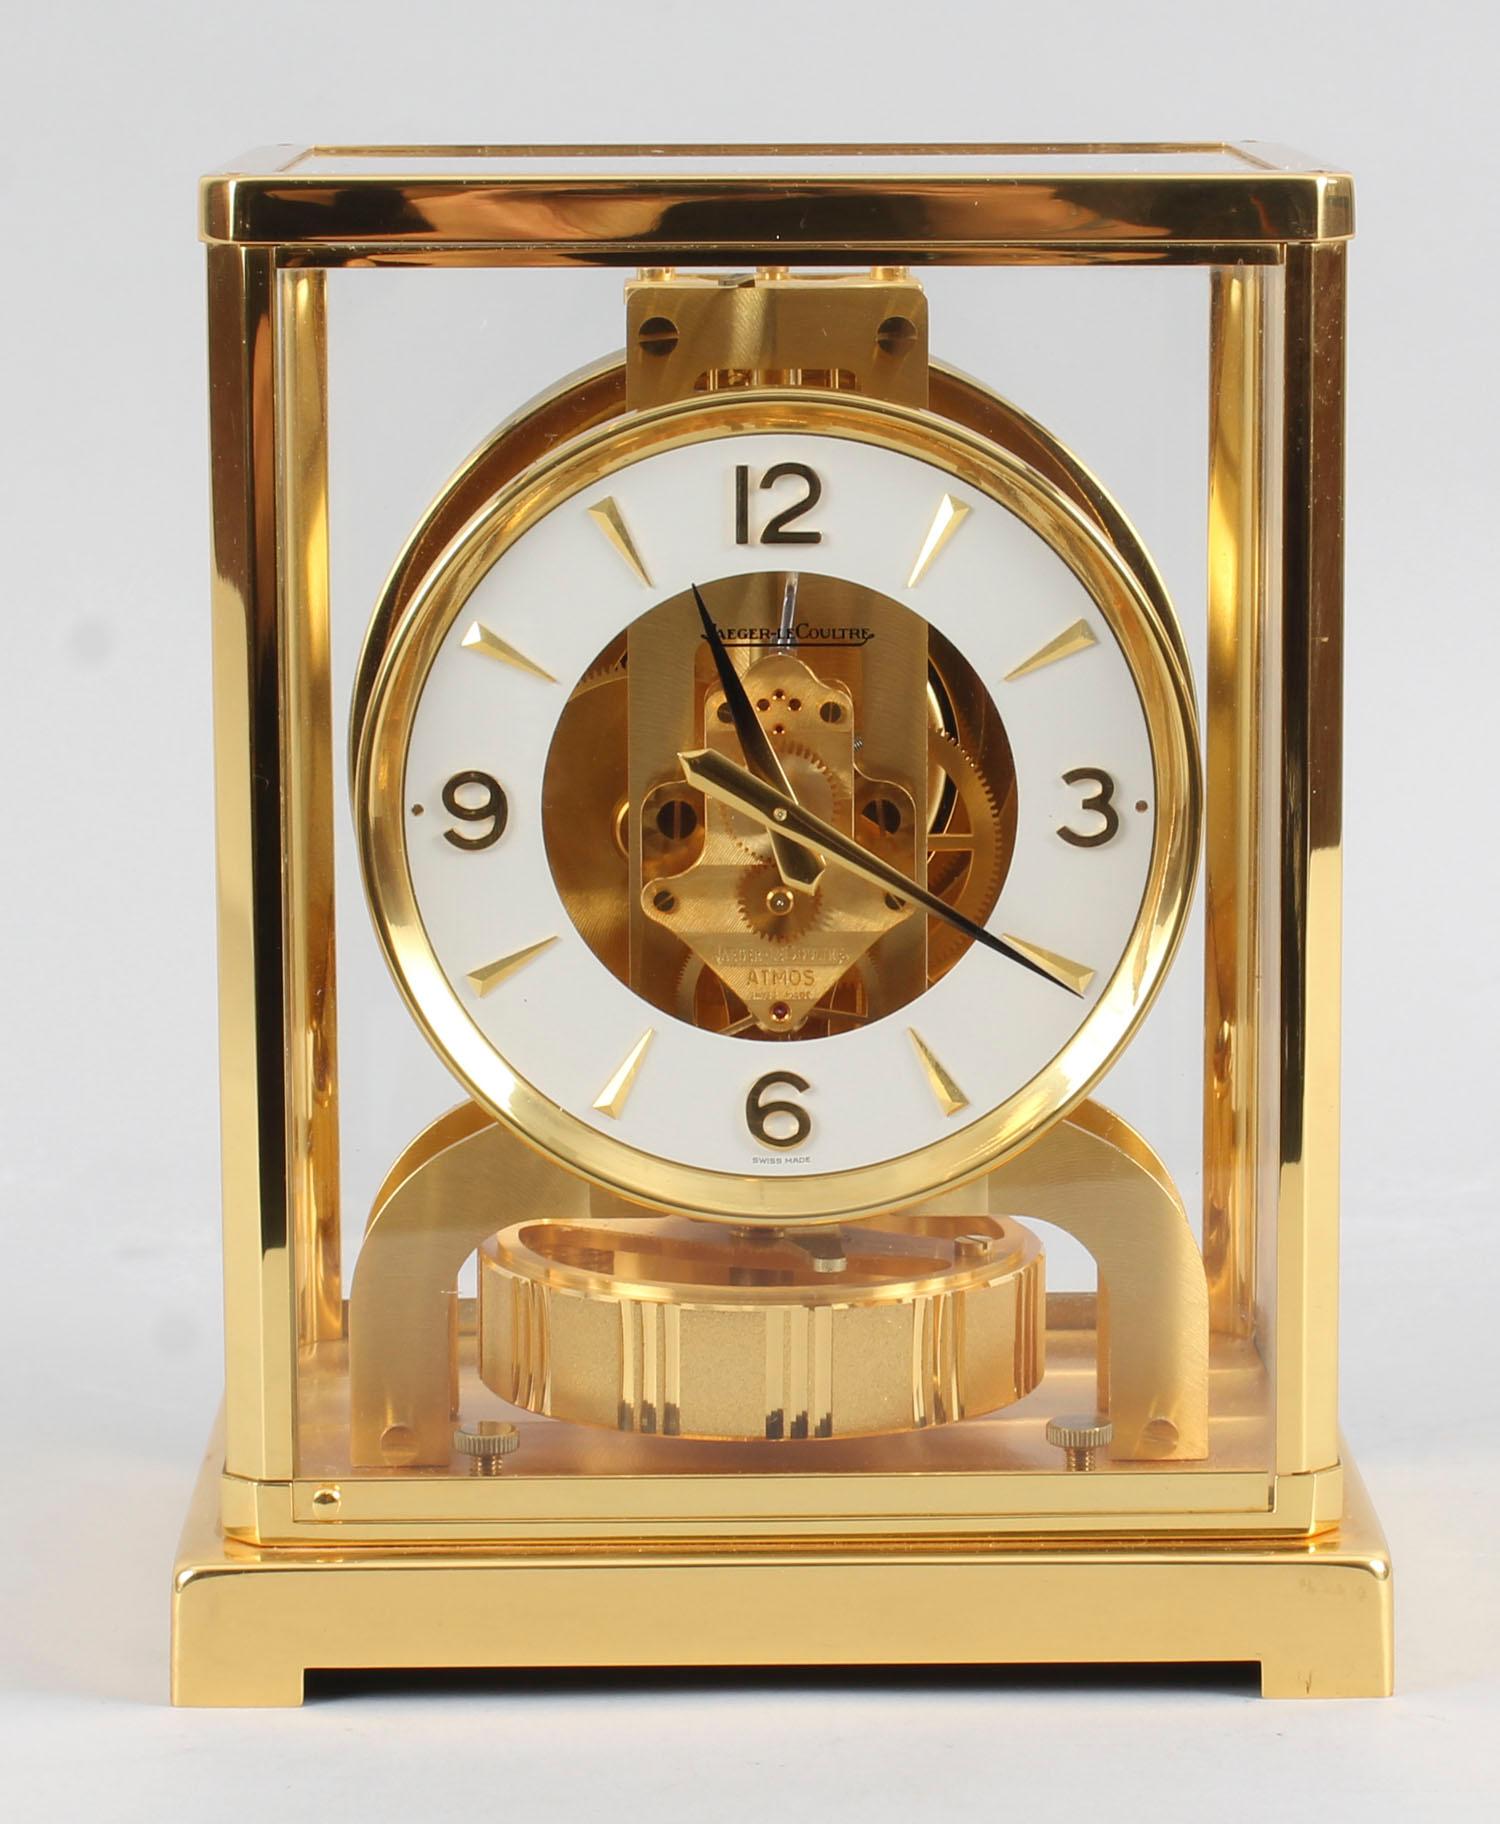 This is beautiful and very decorative Vintage Atmos mantle clock by Jaeger-LeCoultre, bearing their ref No. 491344.

The clock is displayed in a polished gilt rectangular brass case with a glazed door, the case lifts off to allow access to the